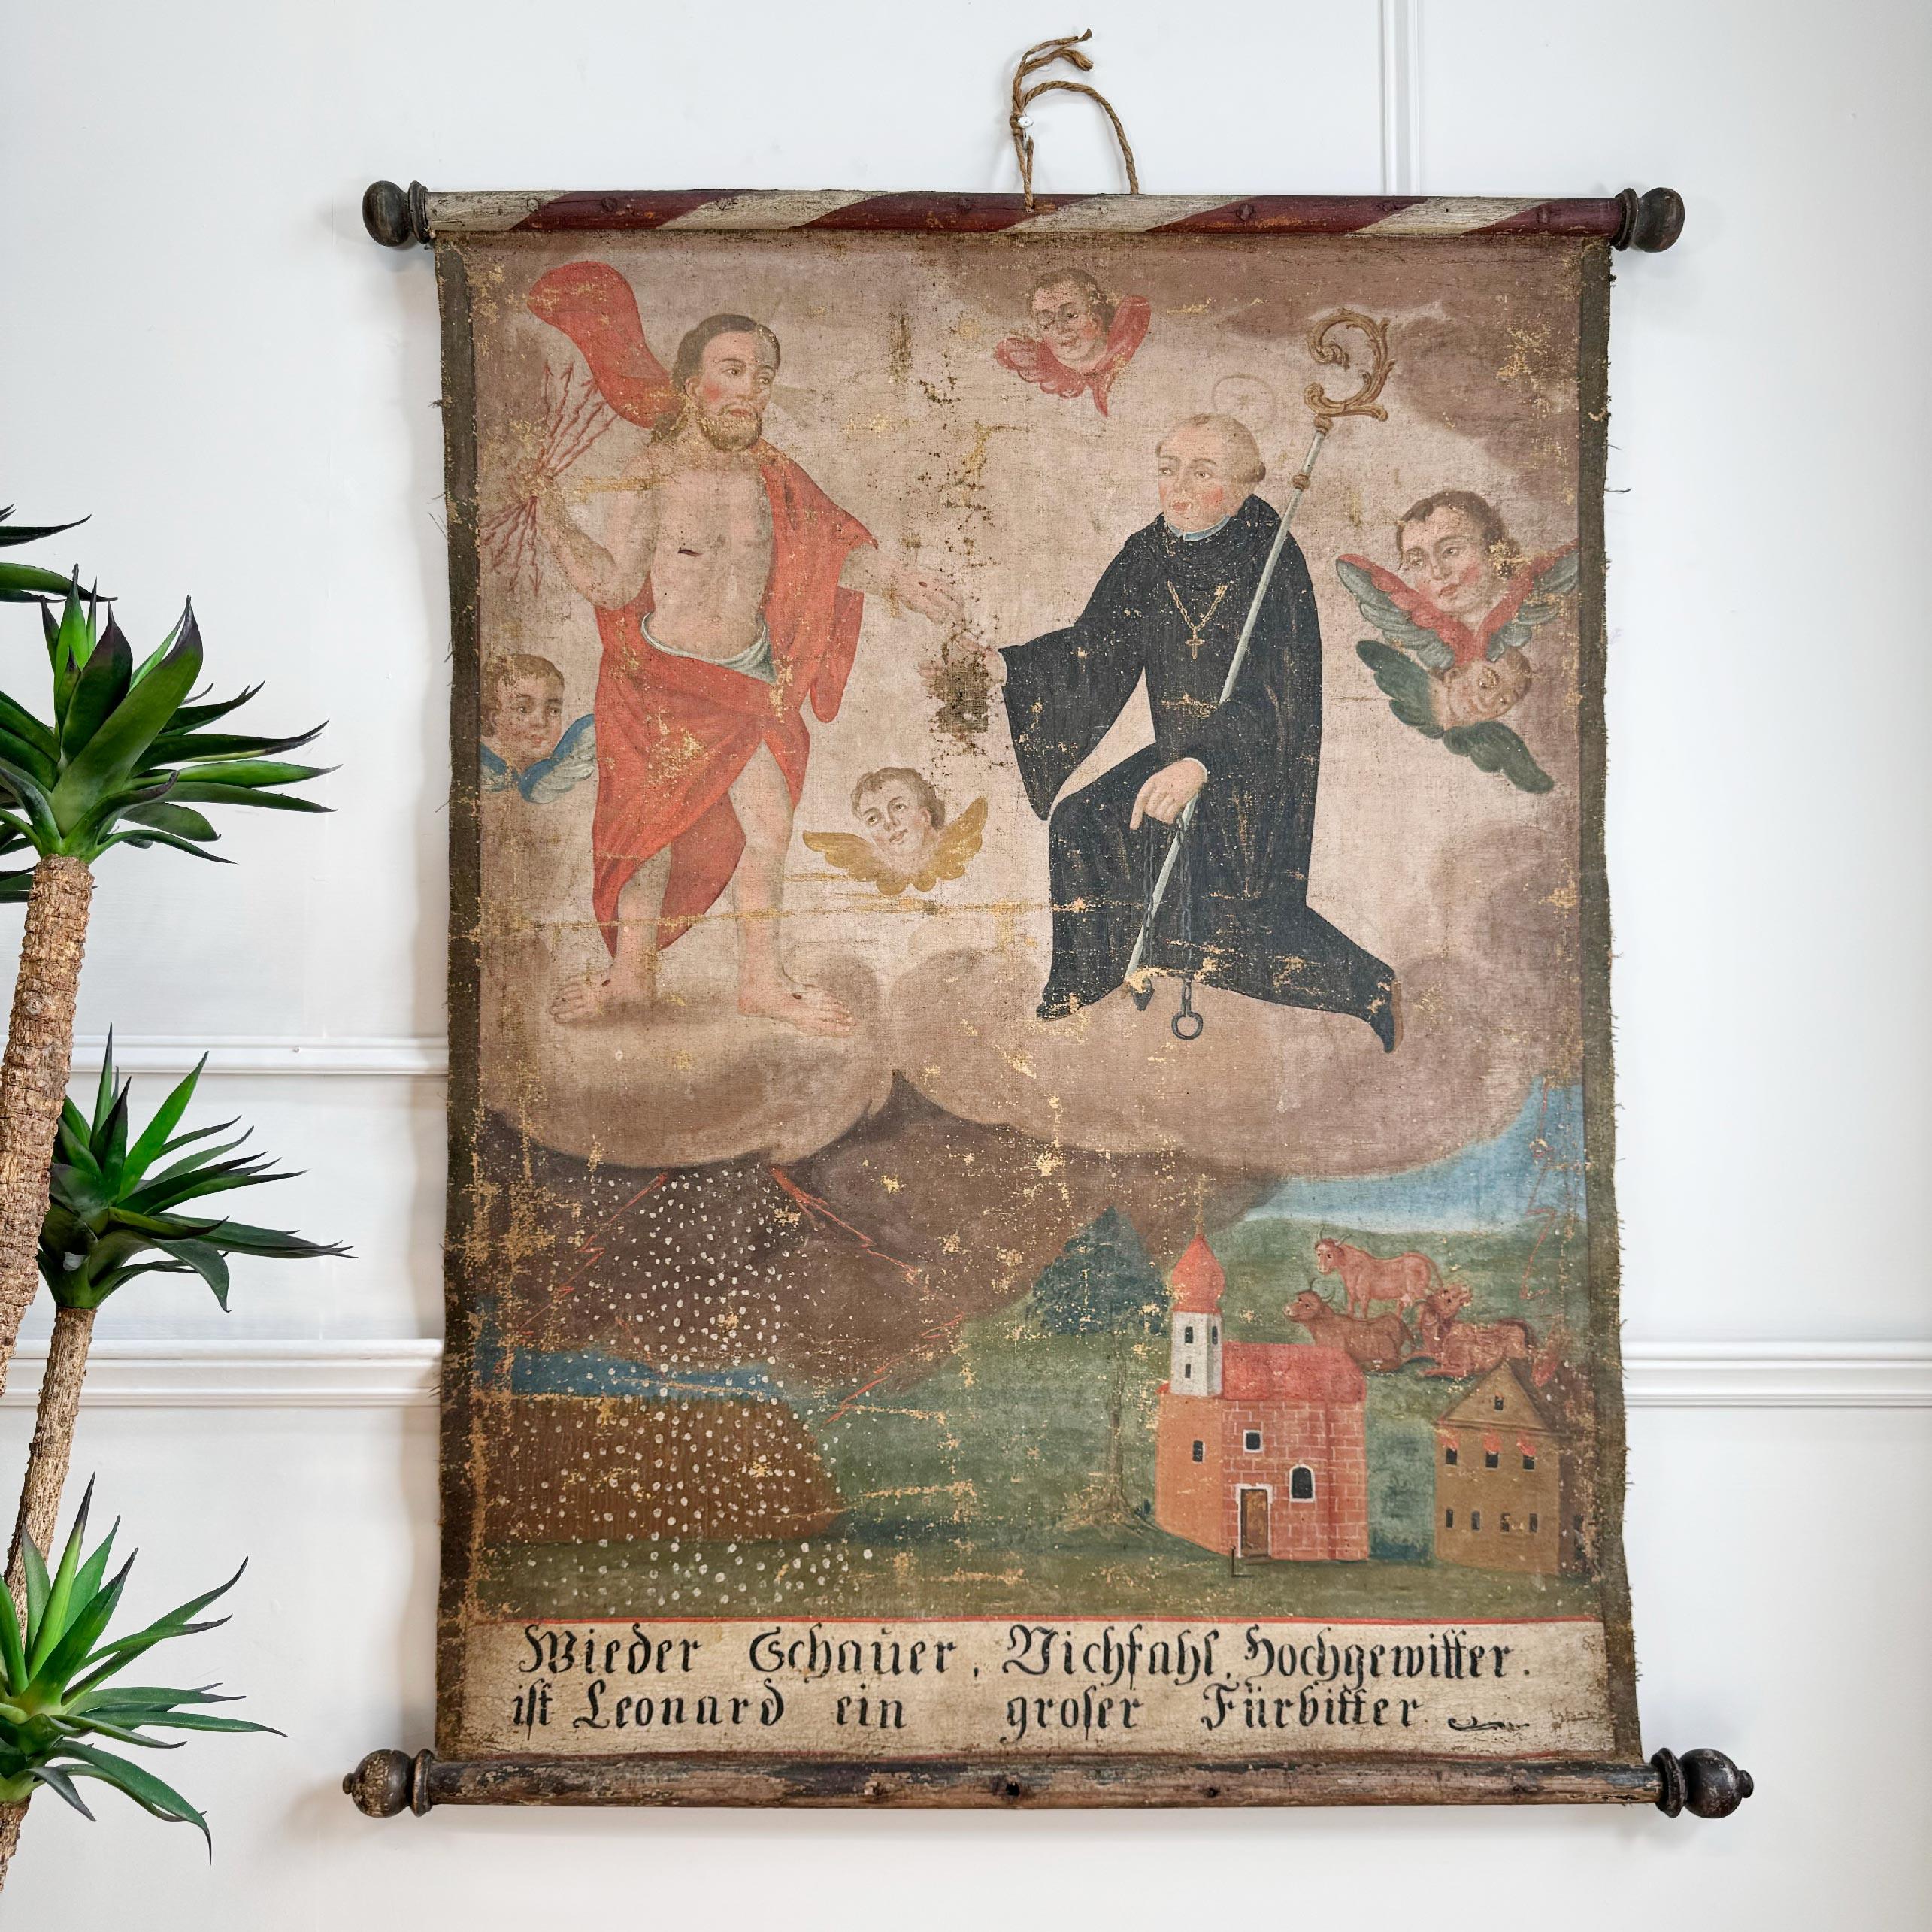 A rare 17th century ecclesiastical double sided wall hanging, oil on canvas of Saint Leonard of Noblac, a Frankish saint closely associated with the town and abbey of Saint-Léonard-de-Noblat, in Haute-Vienne, in the Limousin region of France. He was